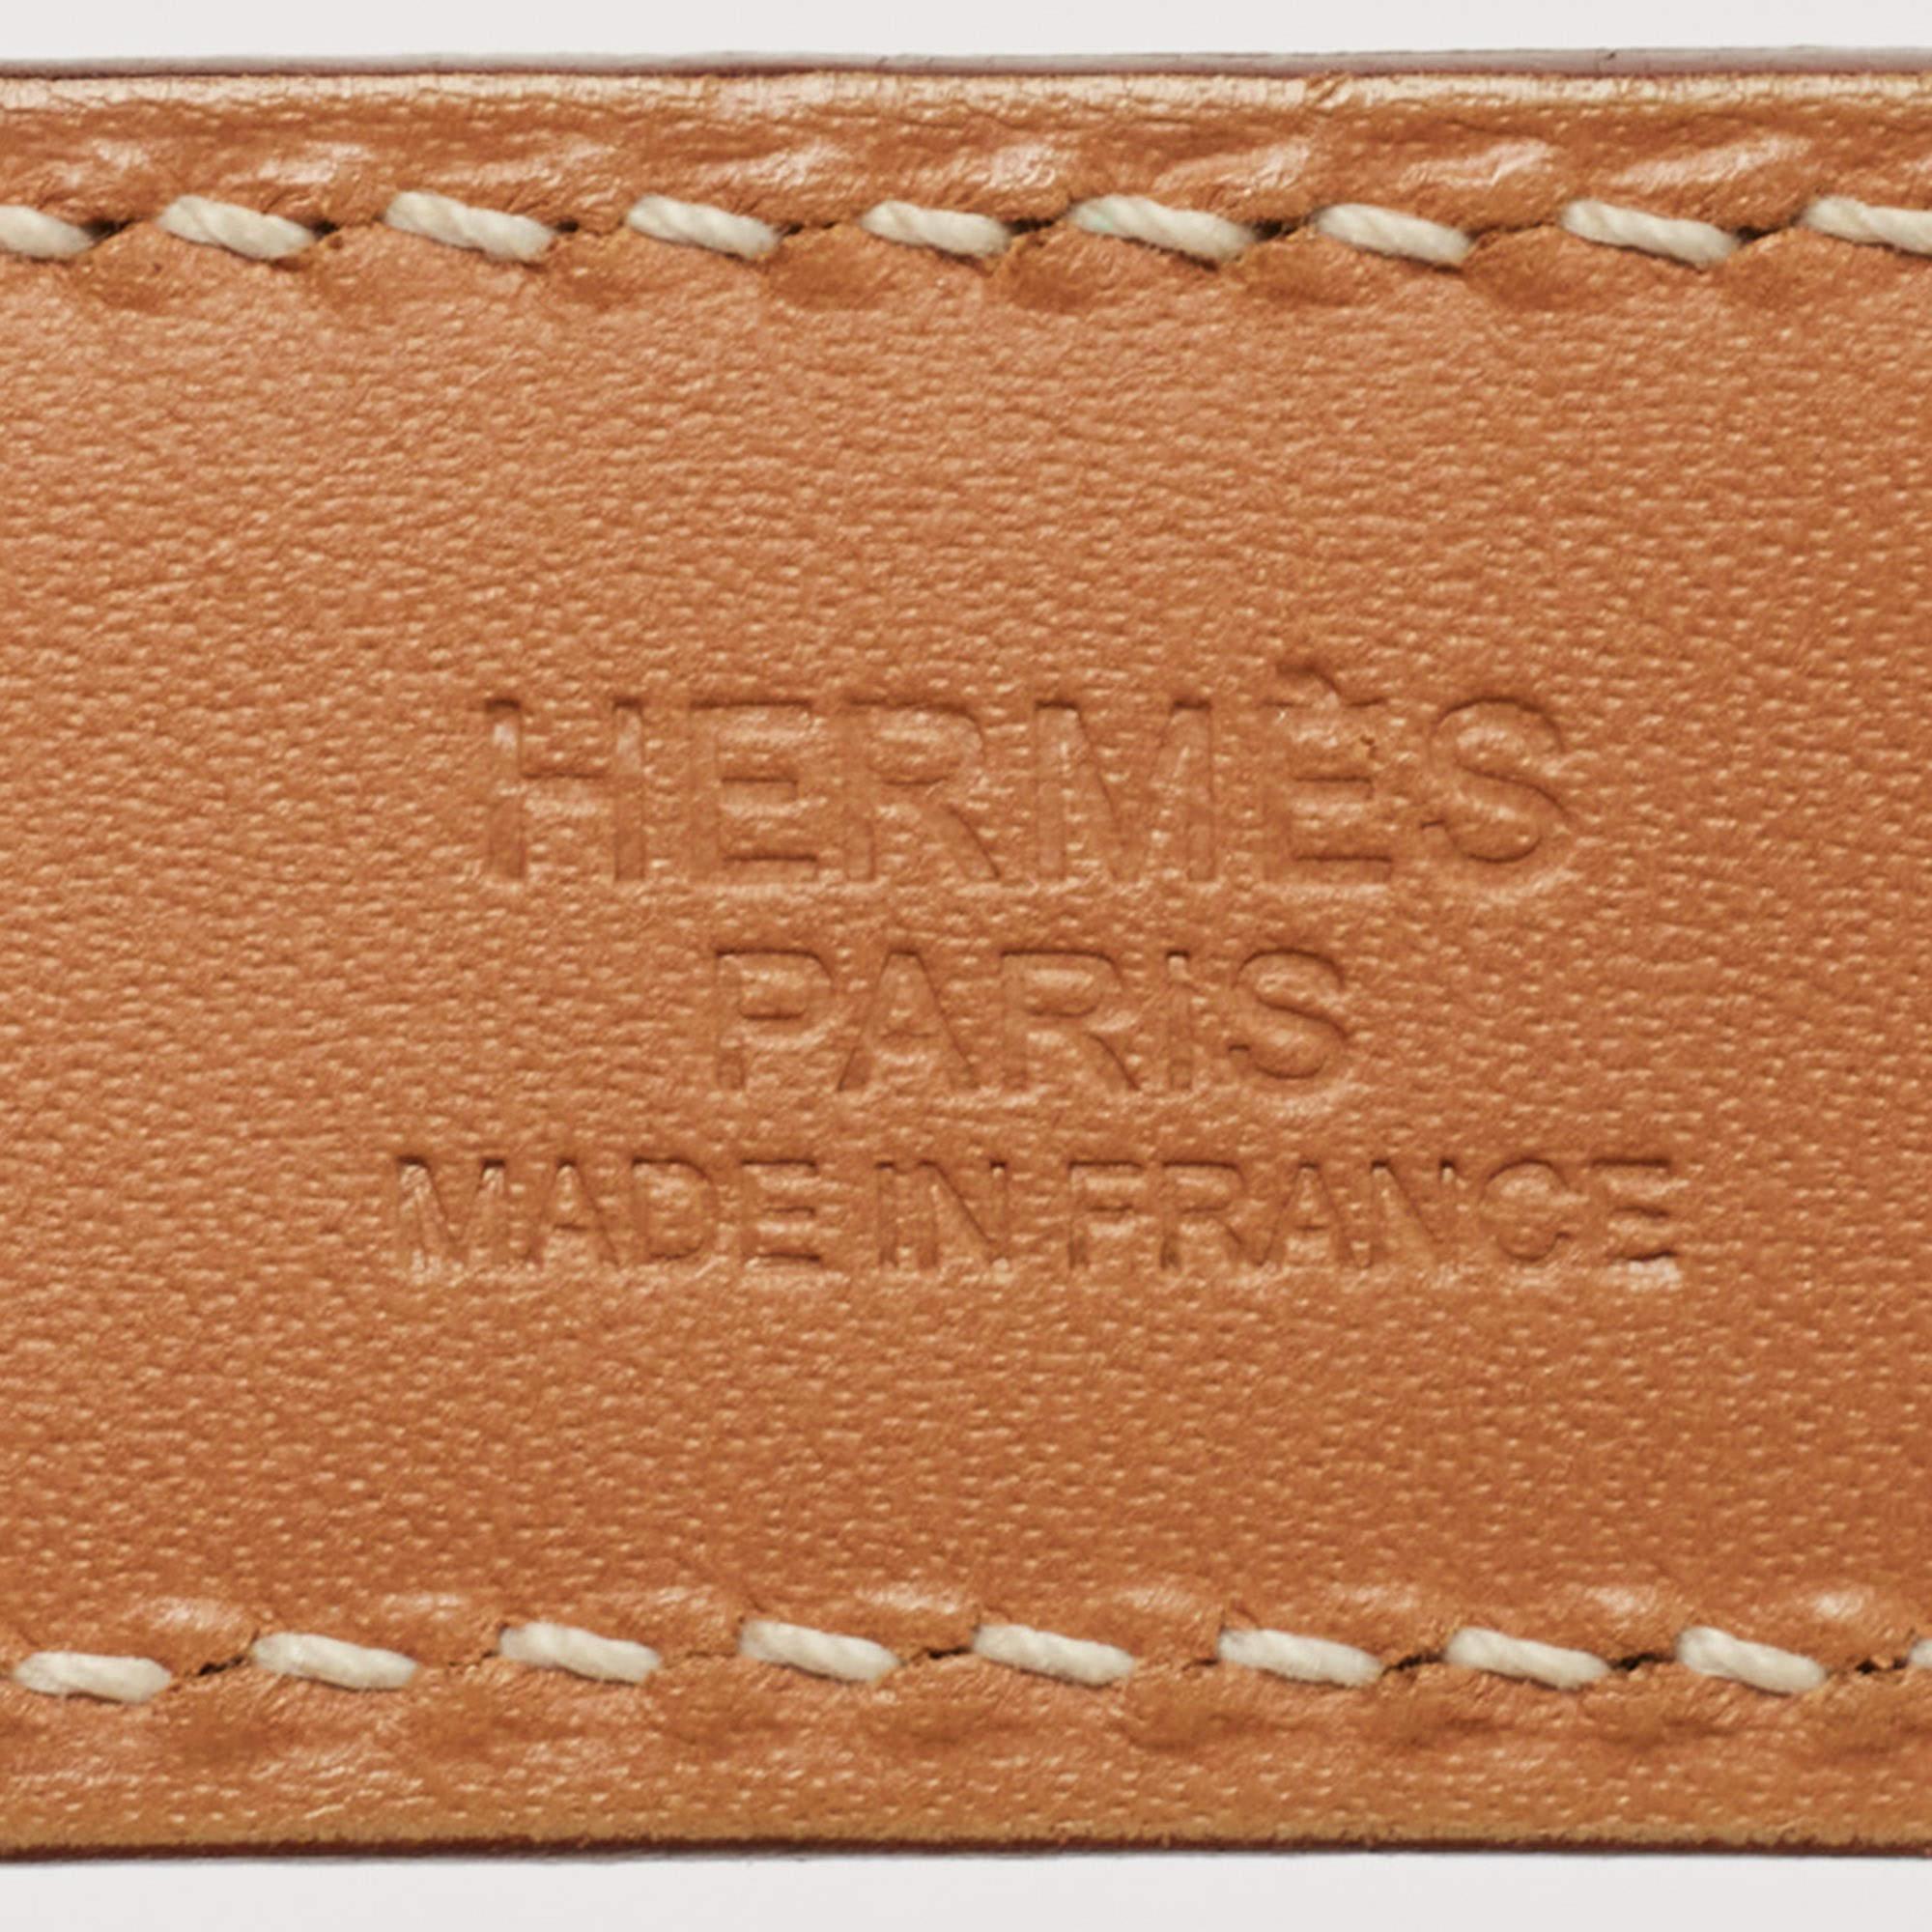 Hermes Orange/Natural Canvas and Leather Cabalicol Bag 7